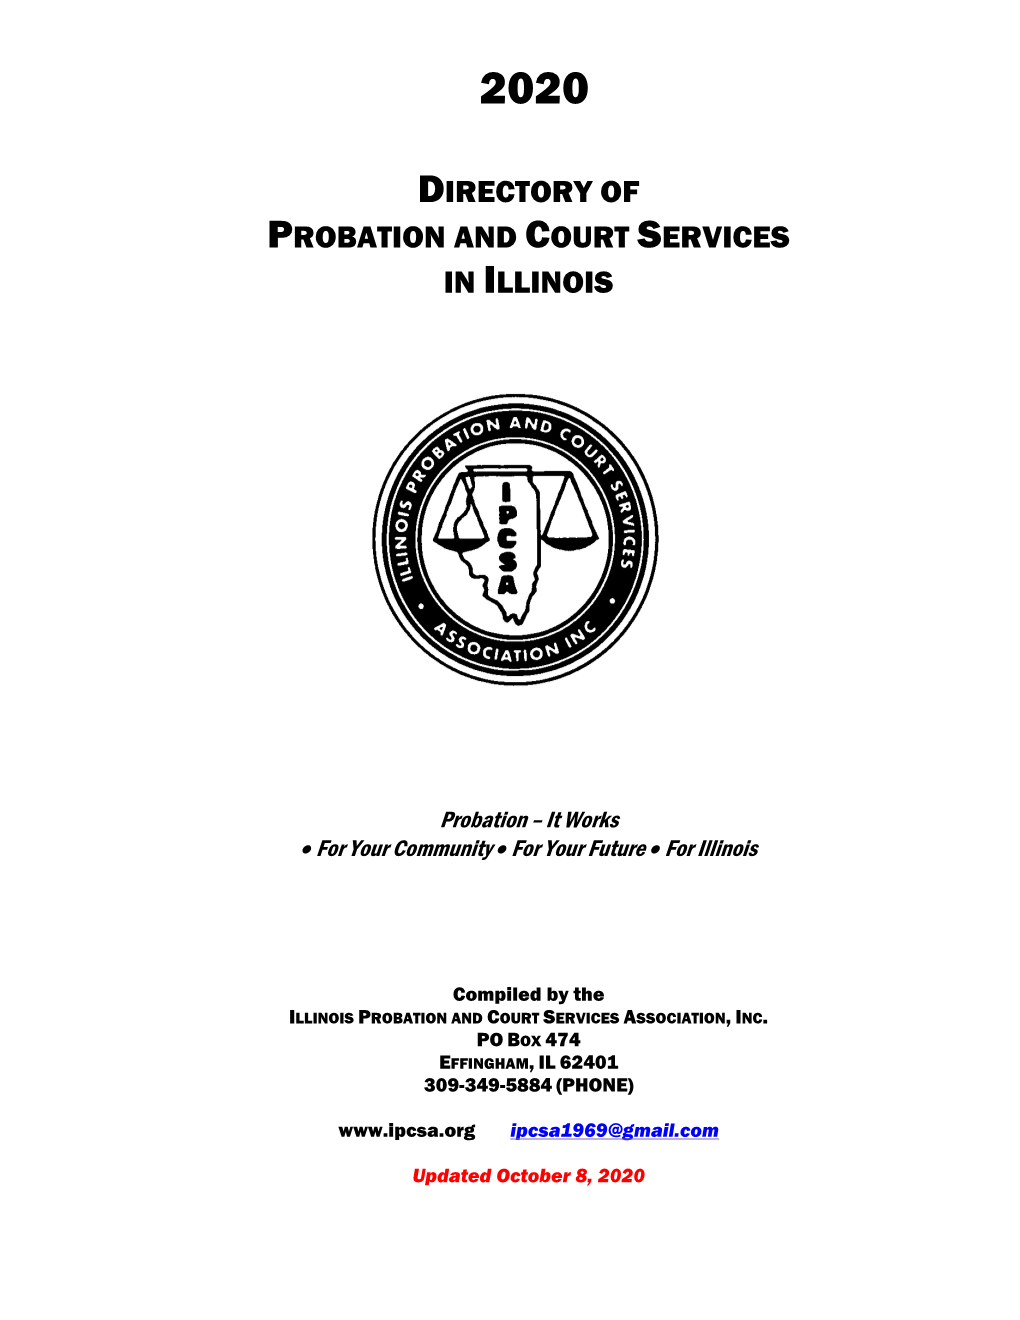 Directory of Probation and Court Services in Illinois